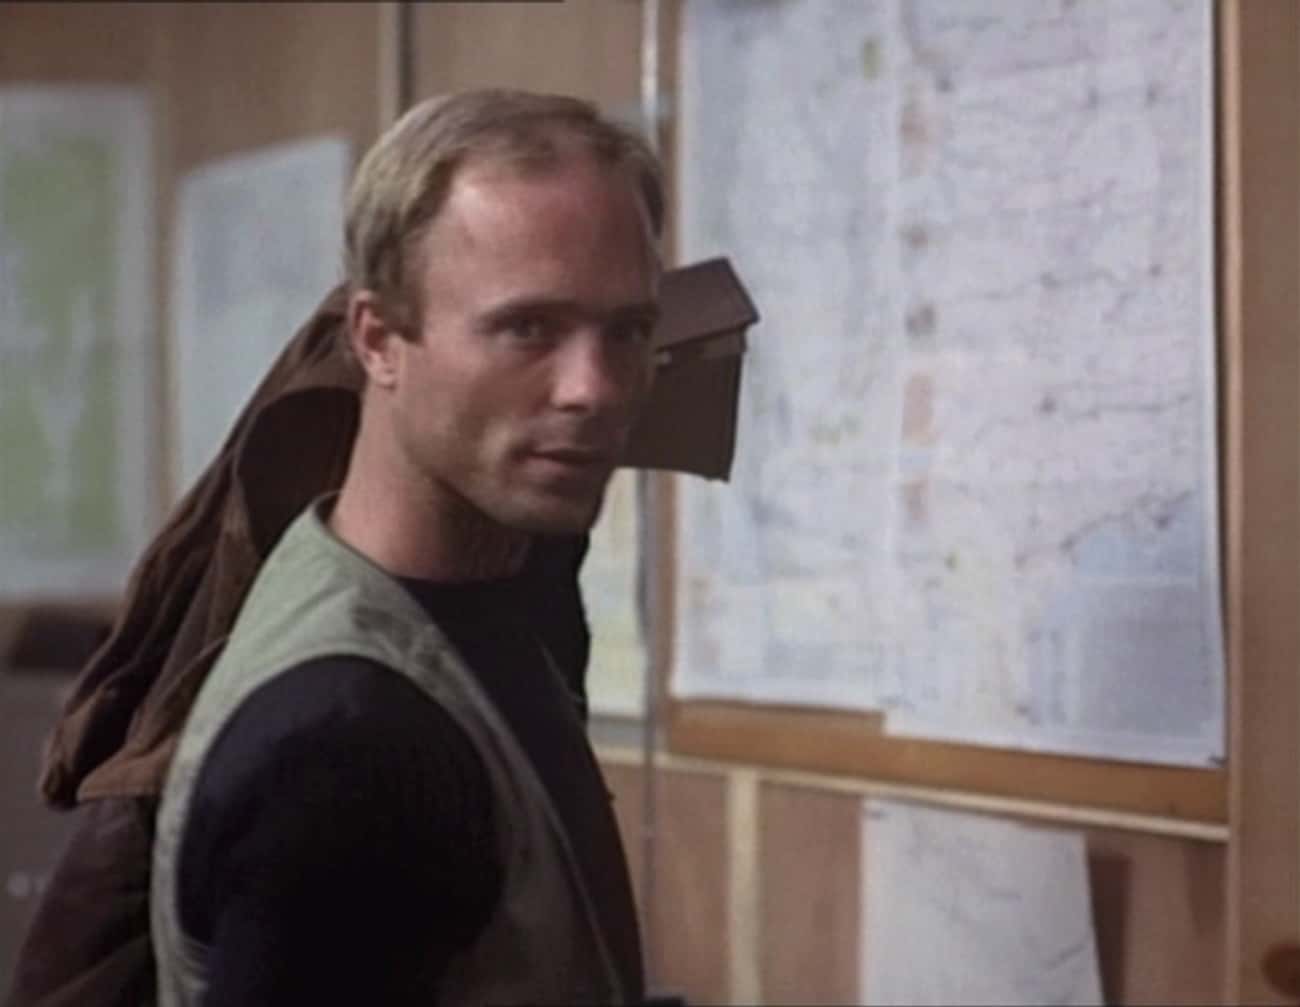 Young Ed Harris in Black T-Shirt and Gray Vest